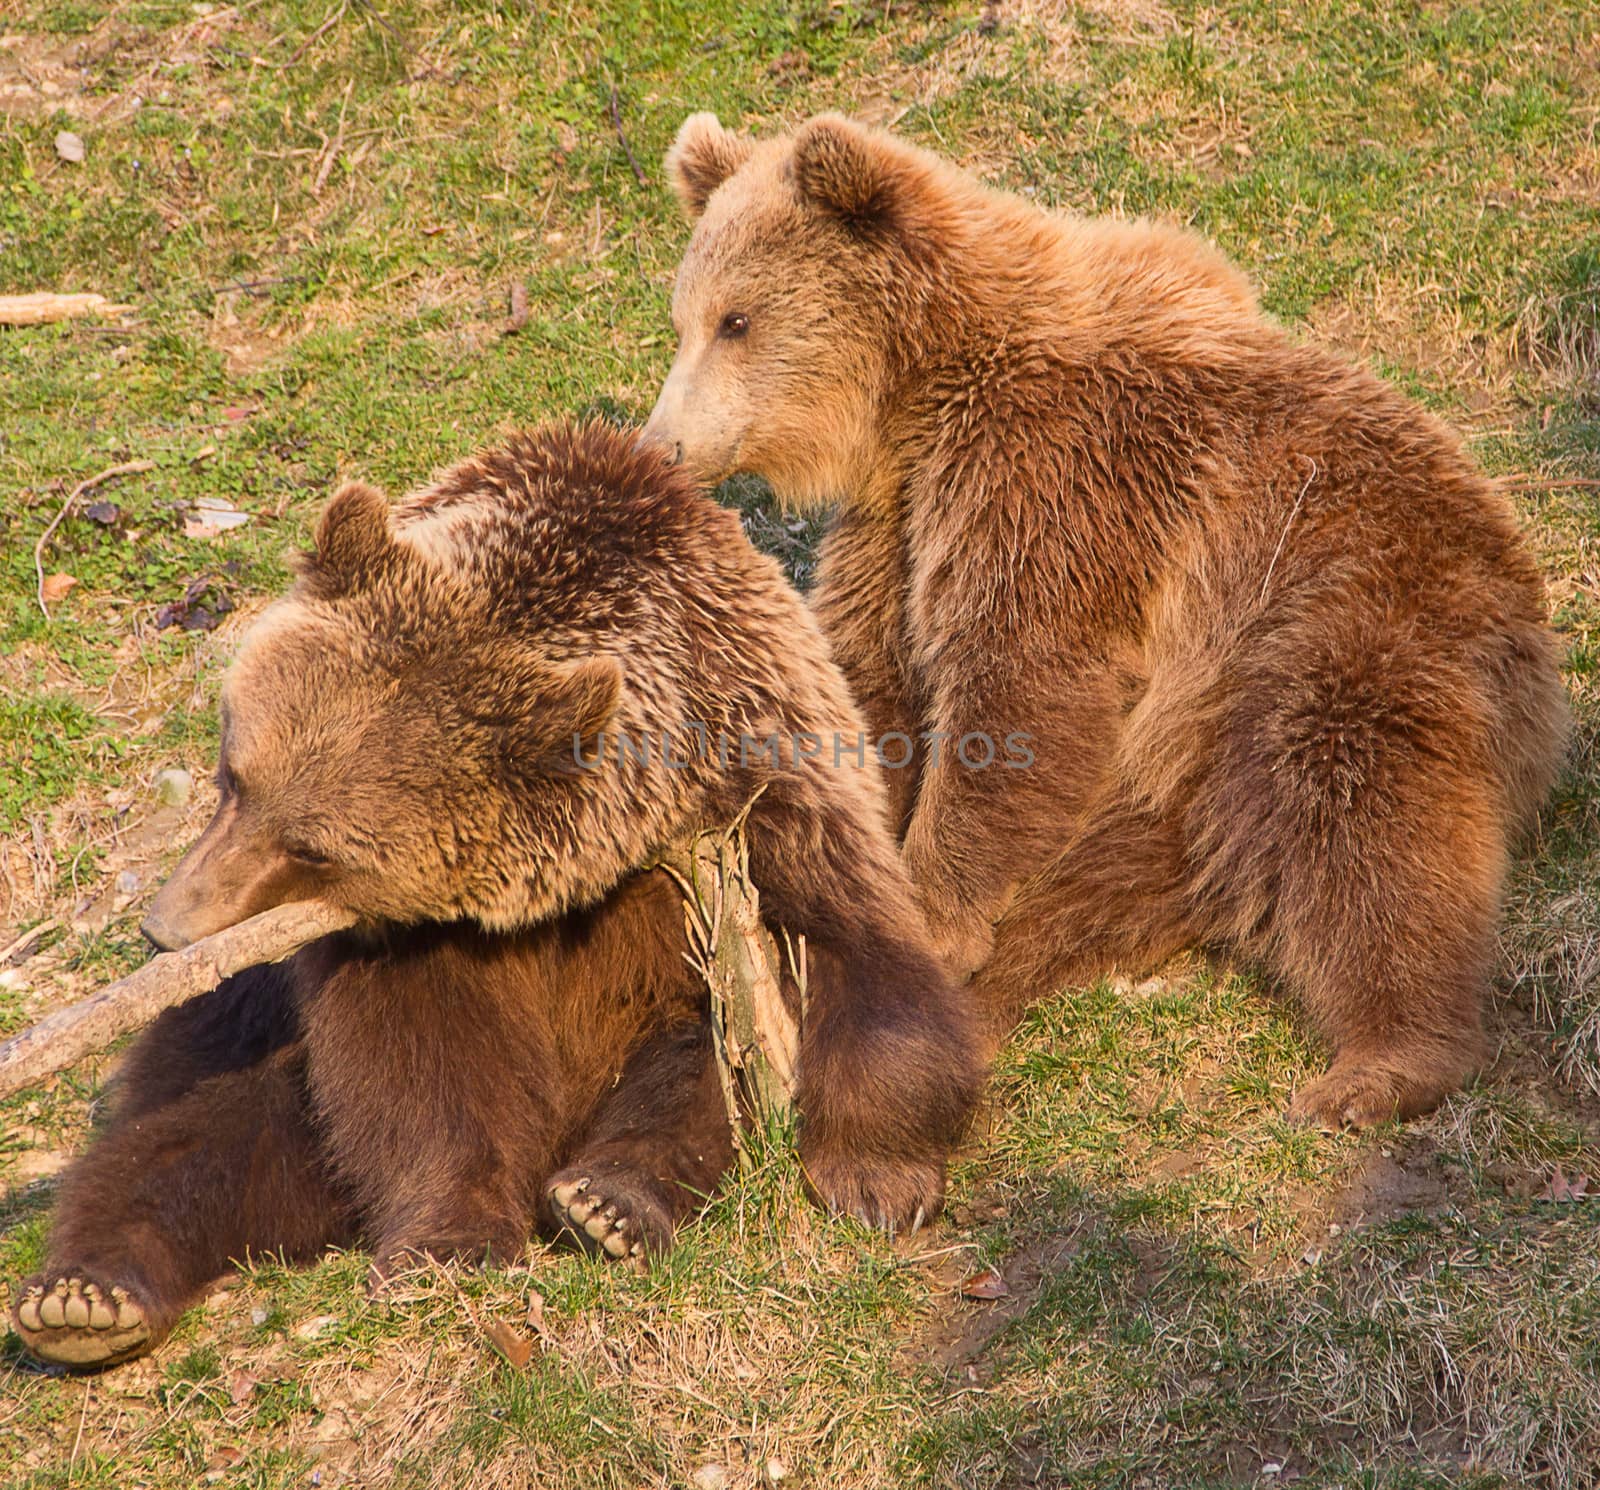 Brown bear and cub in Bern (Brown bears are symbol of the city)